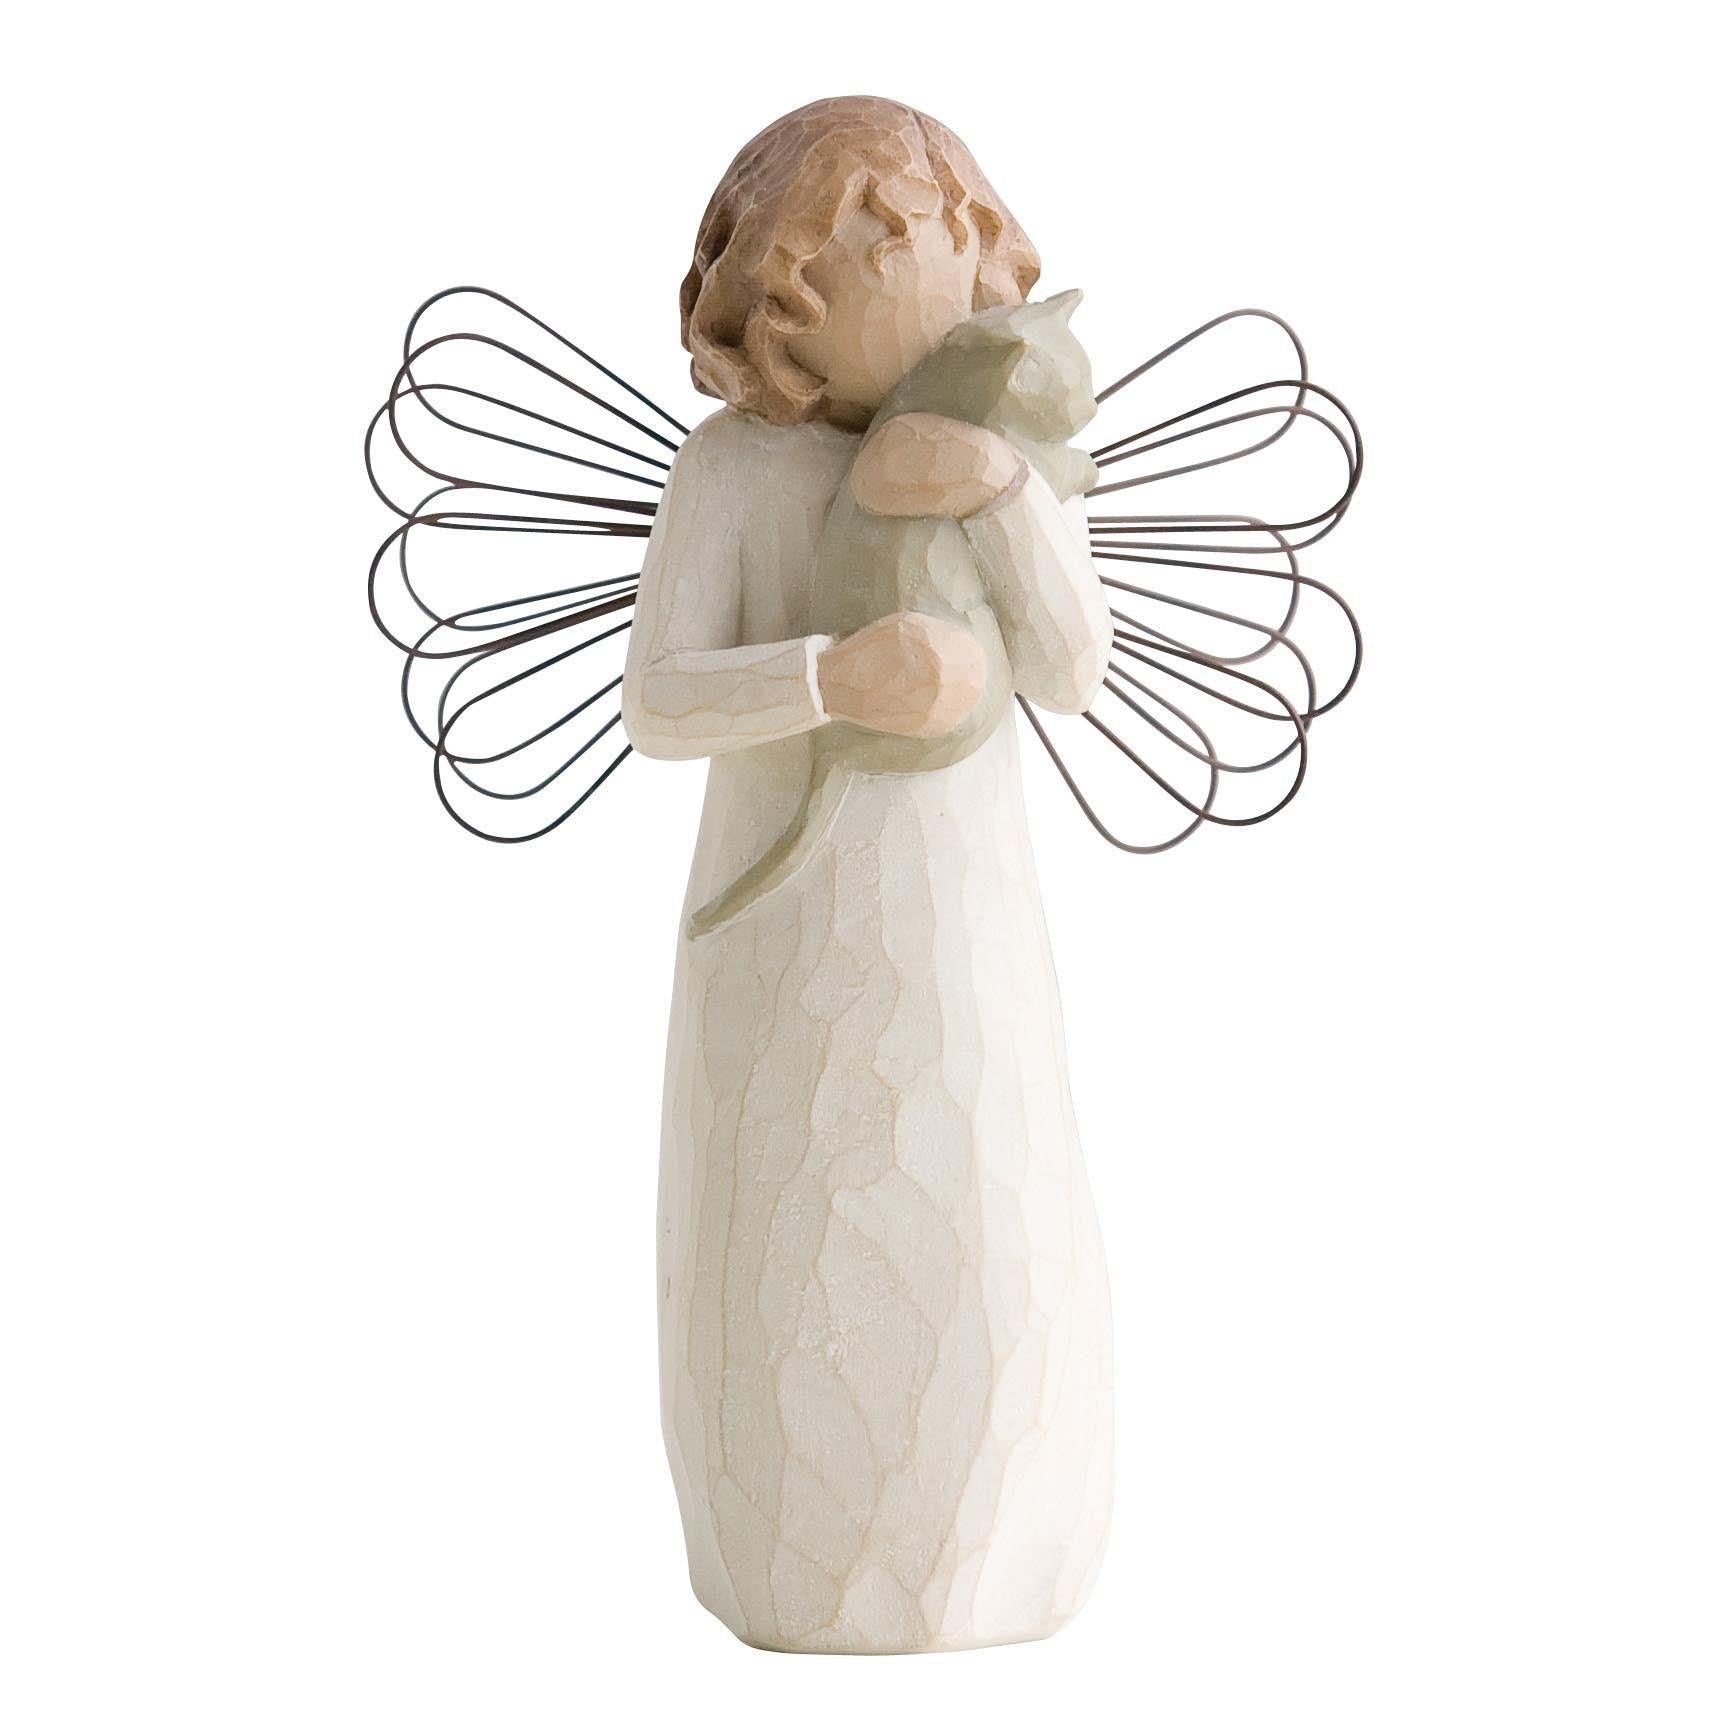 Willow Tree - With Affection (Willow Tree) - Gallery Gifts Online 